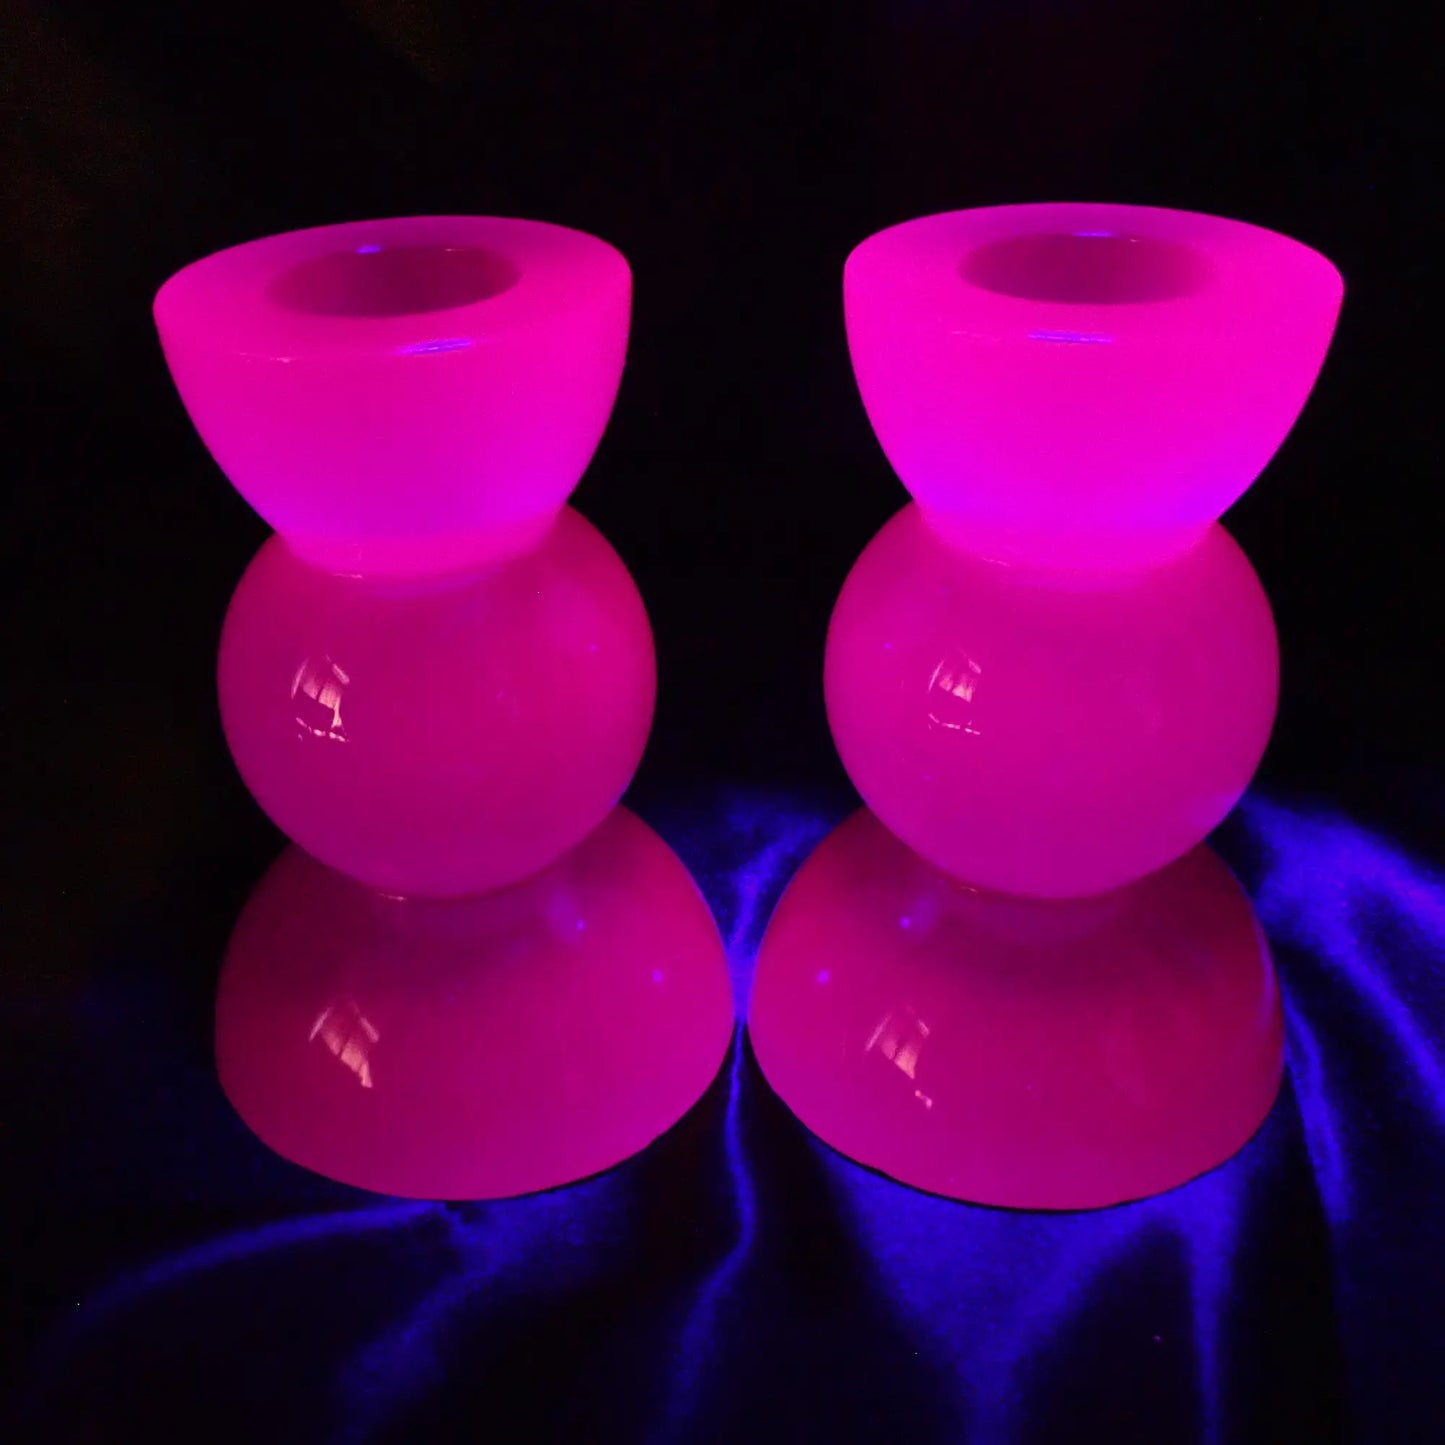 Photo showing the handmade neon purple resin candlestick holders fluorescing under a UV light in a pink color.